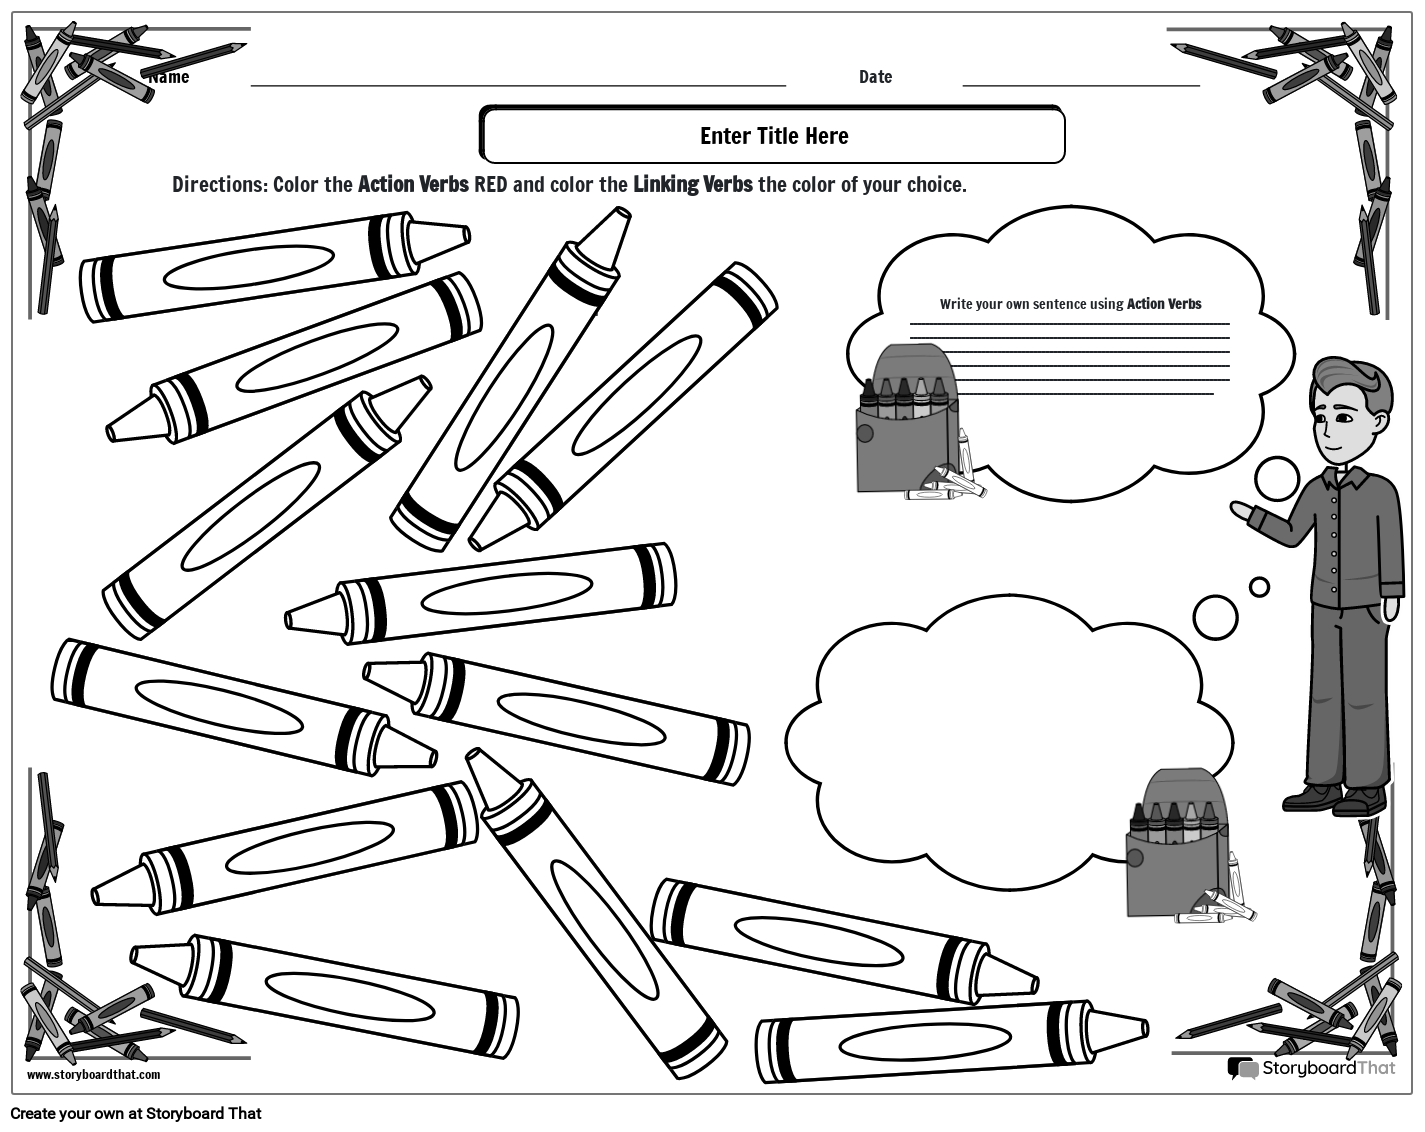 Action and Linking Verbs - Grammar Worksheet with Crayons - BW